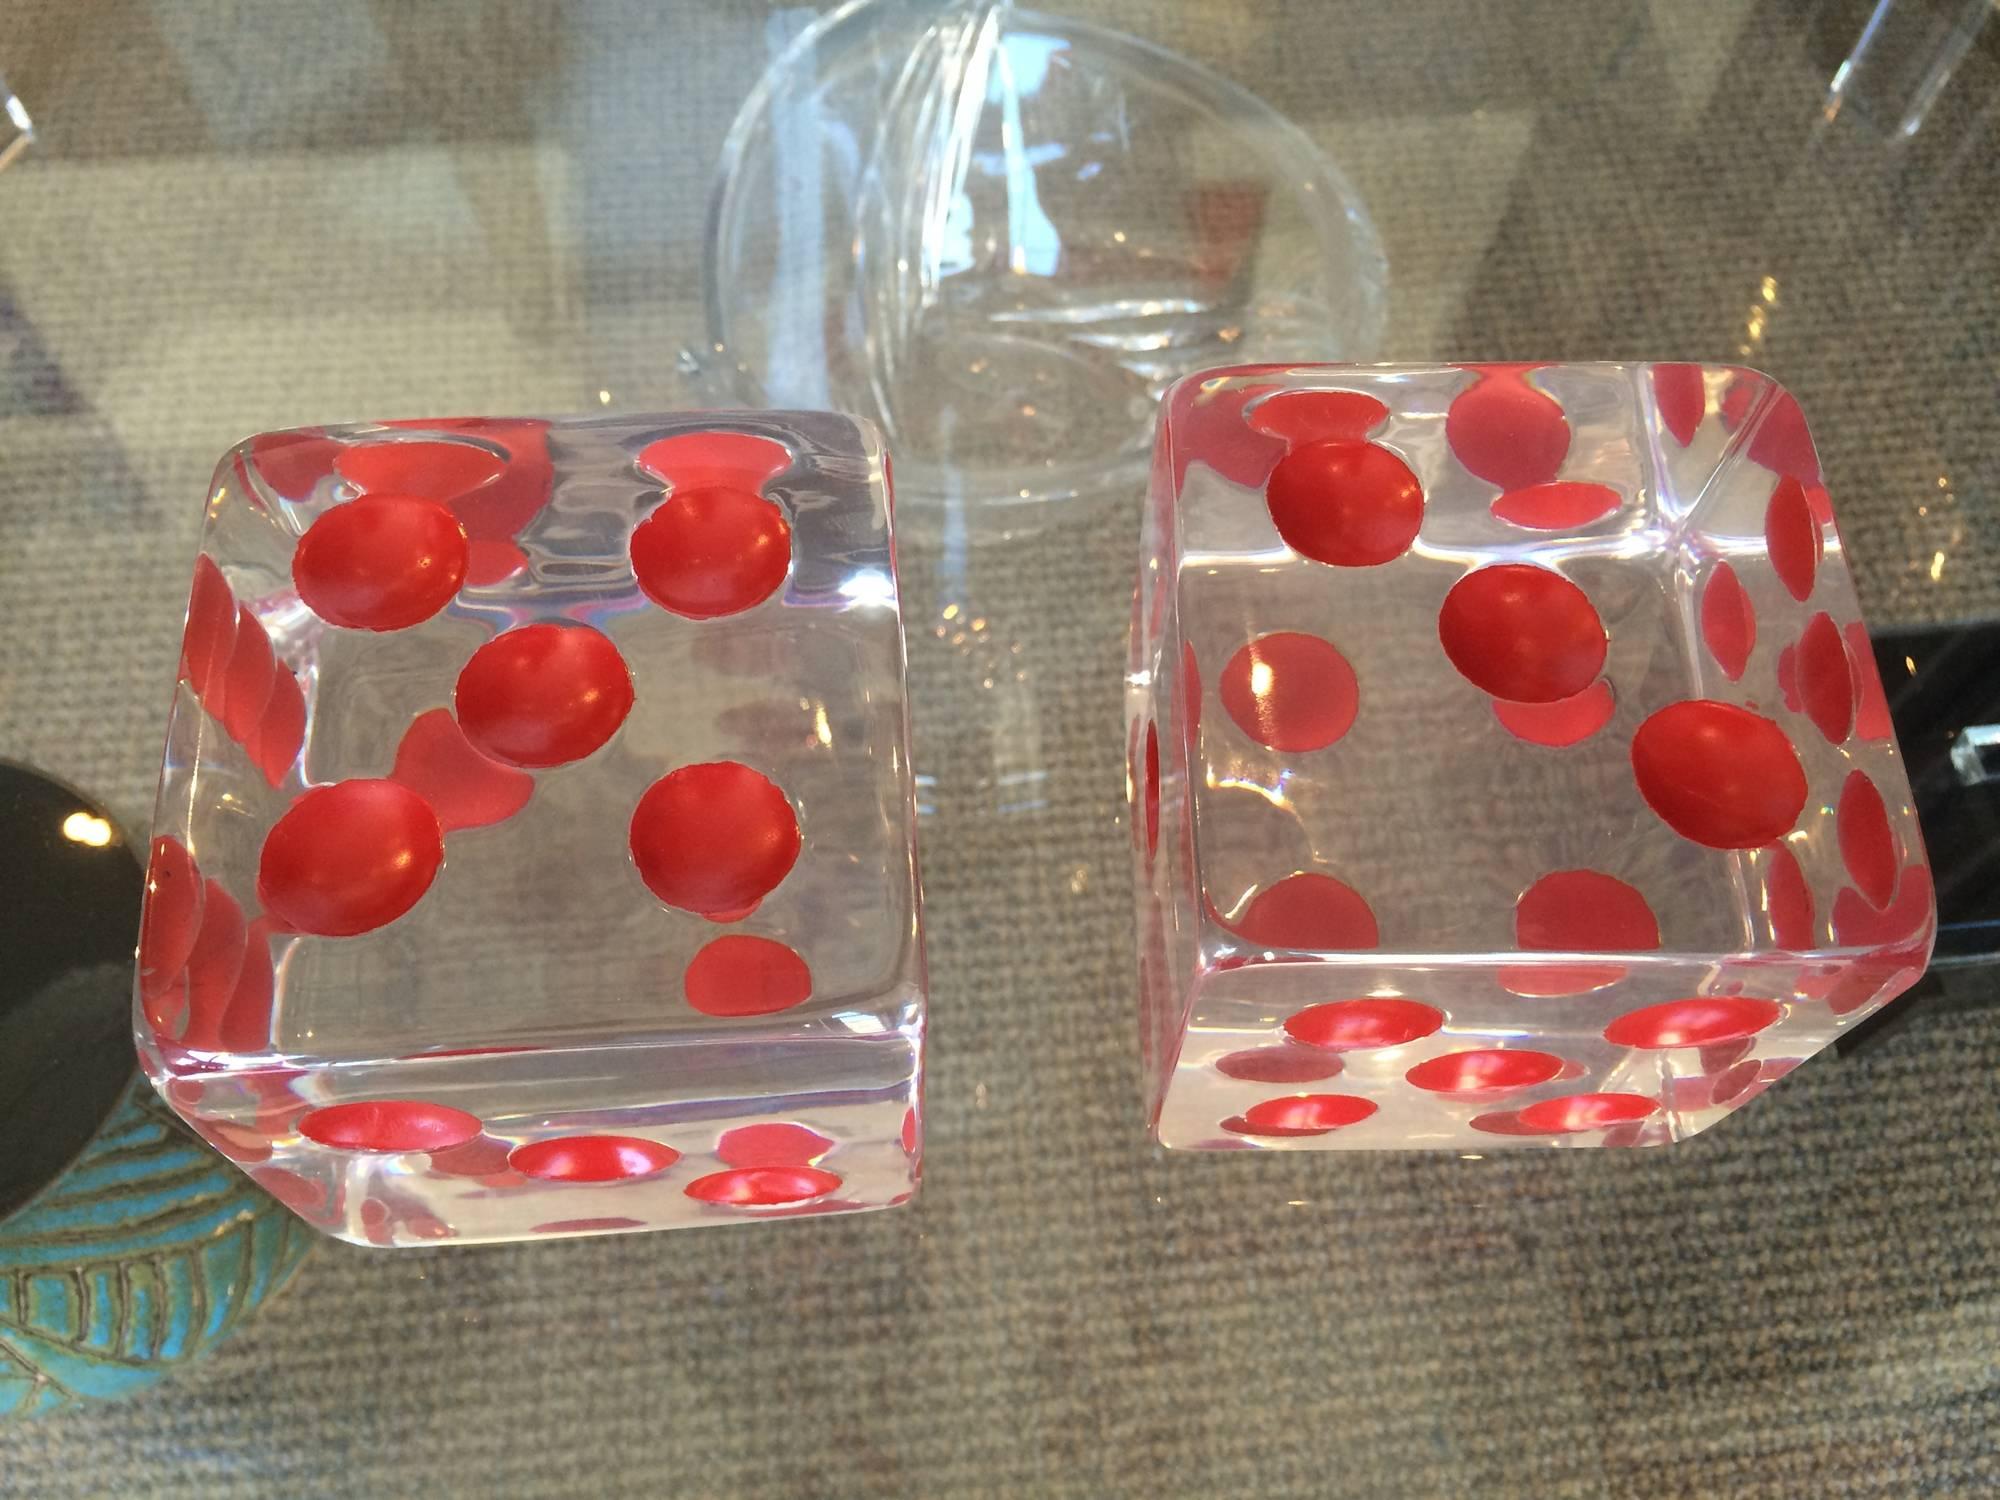 American Oversized Dice Sculpture with Red Dots by Charles Hollis Jones For Sale